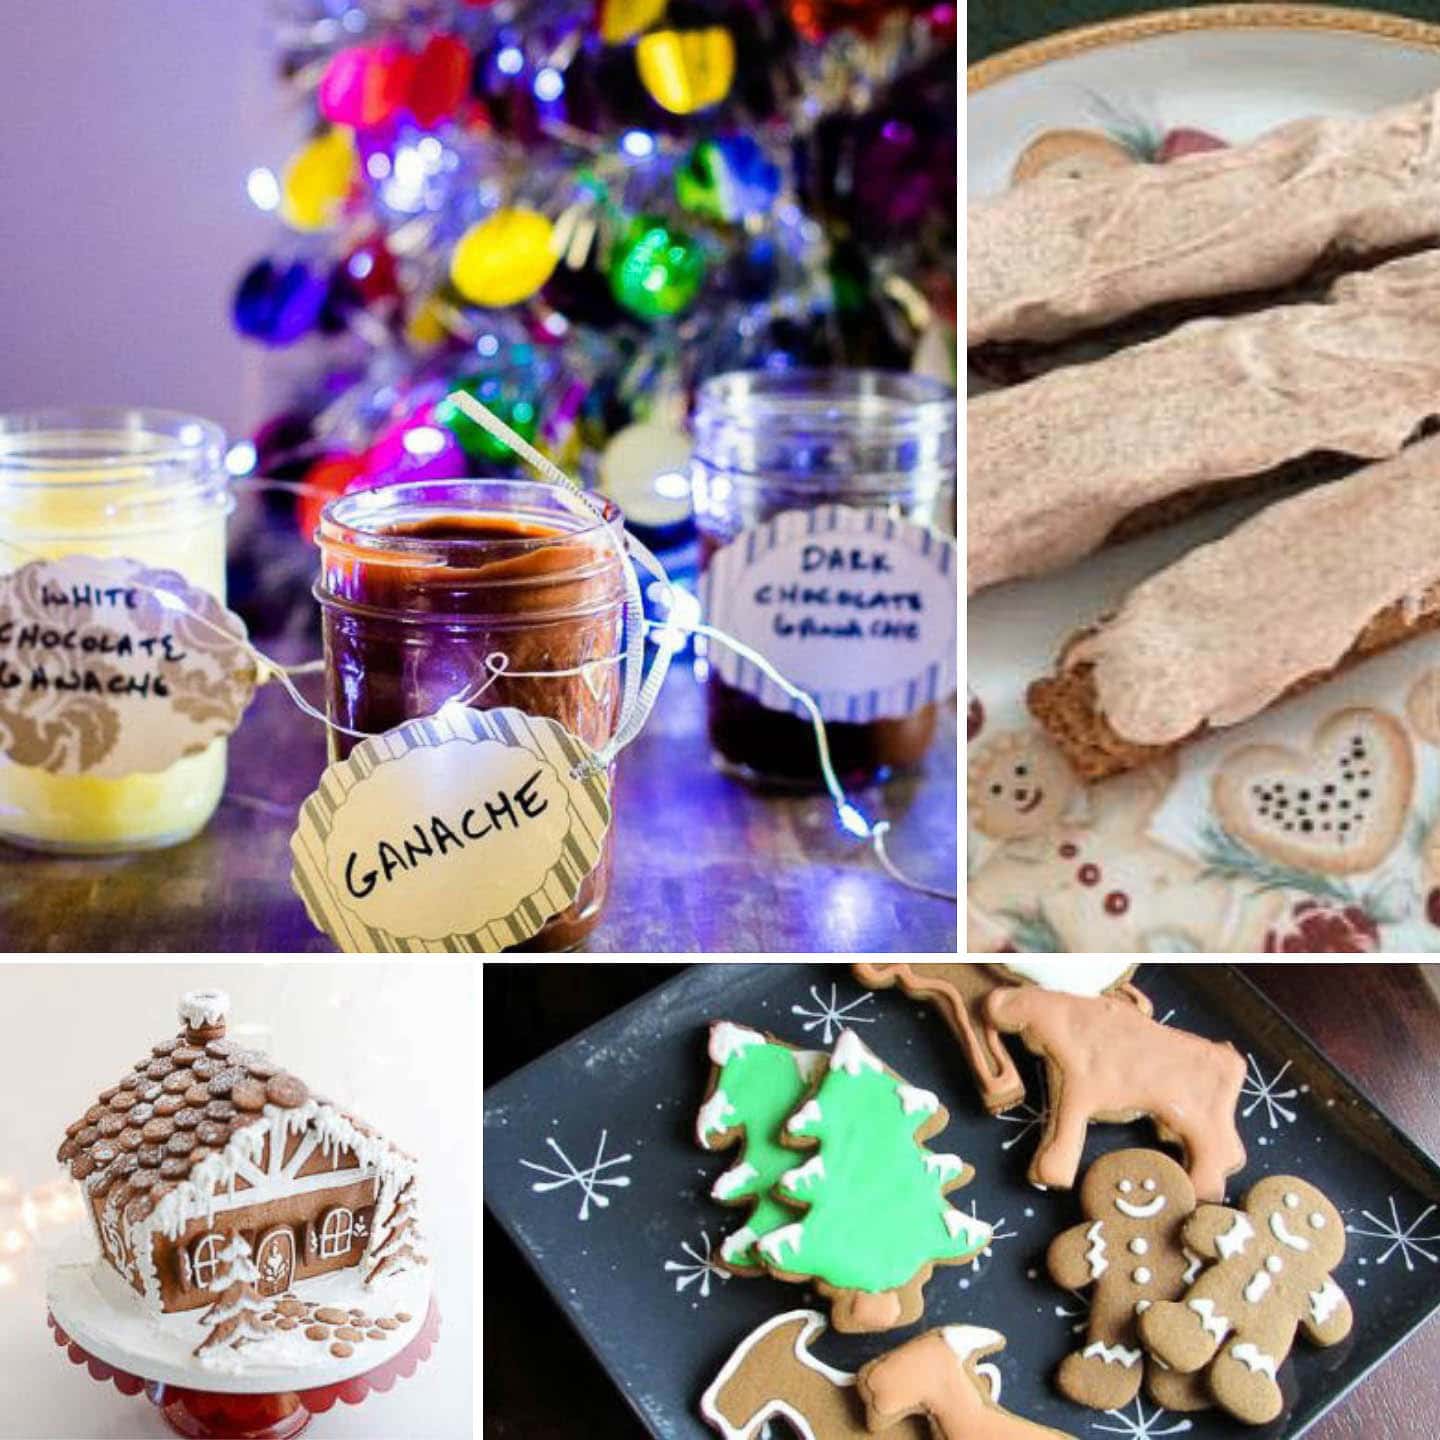 Ganache hot cocoa, white chocolate glazed gingerbread biscotti, gingerbread house and German gingerbread cookies